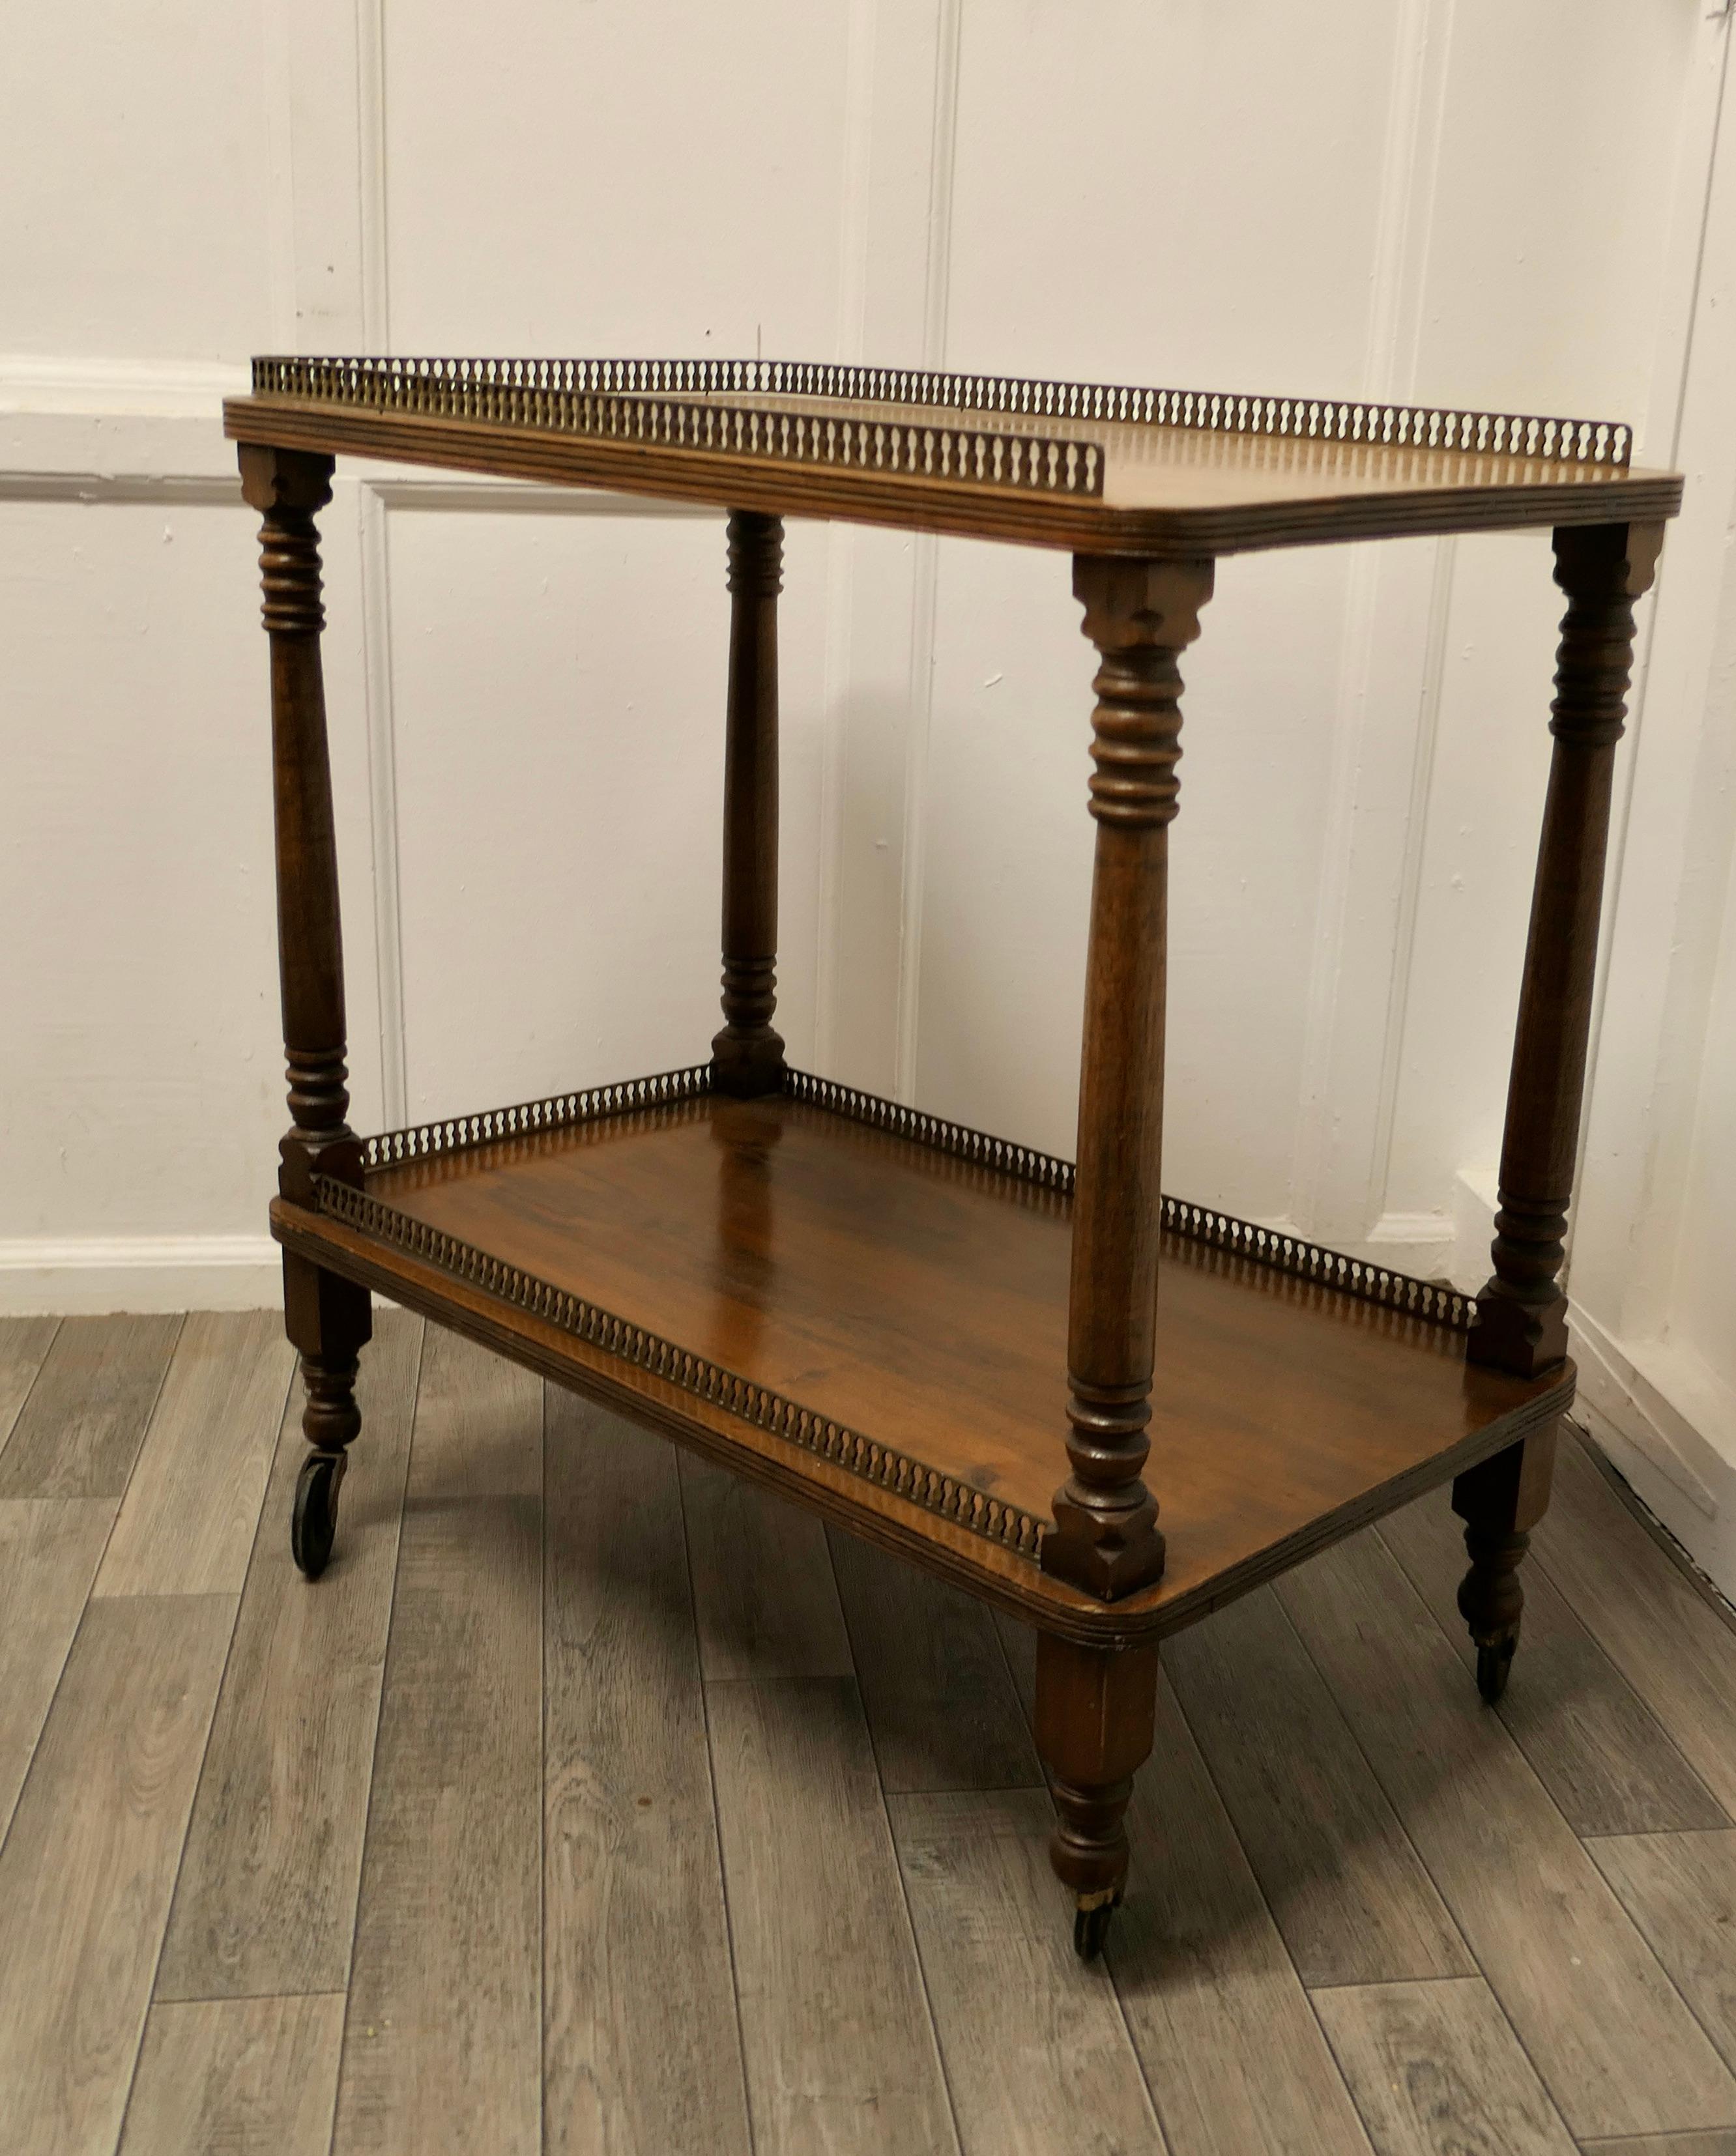 A superb walnut 2 tier tea trolley, with brass galleries. 

A superb Walnut 2 tier tea trolley, with pierced brass galleries on 3 sides of both tiers, the trolley stands on fully swivelling casters and is in good condition.
The trolly is 31”